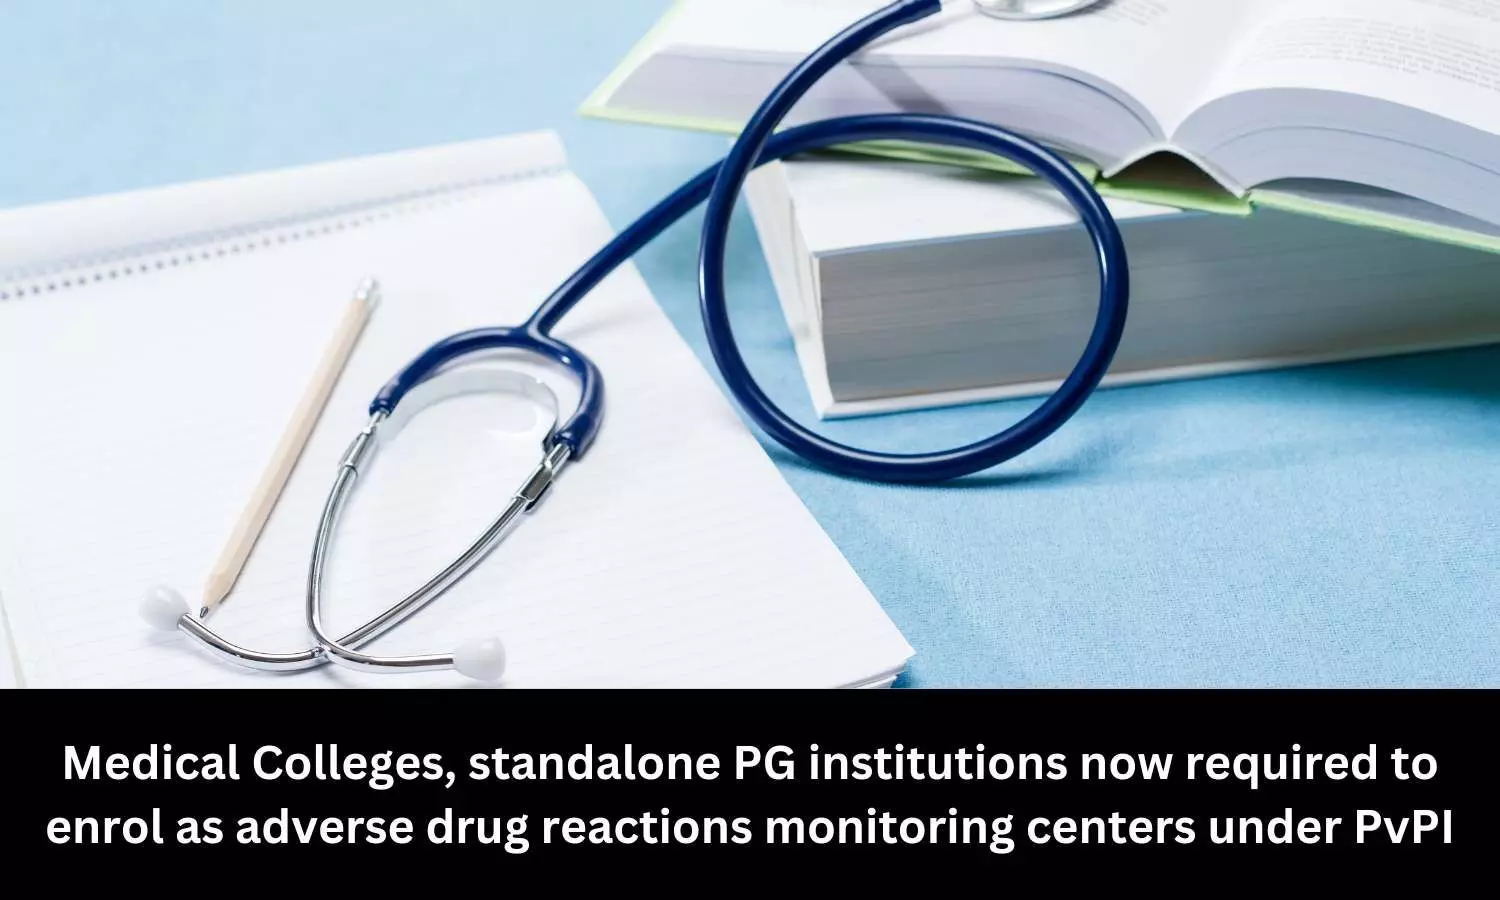 NMC directs medical colleges, standalone PG institutions to enrol as Adverse Drug Reactions Monitoring Centers  under PvPI